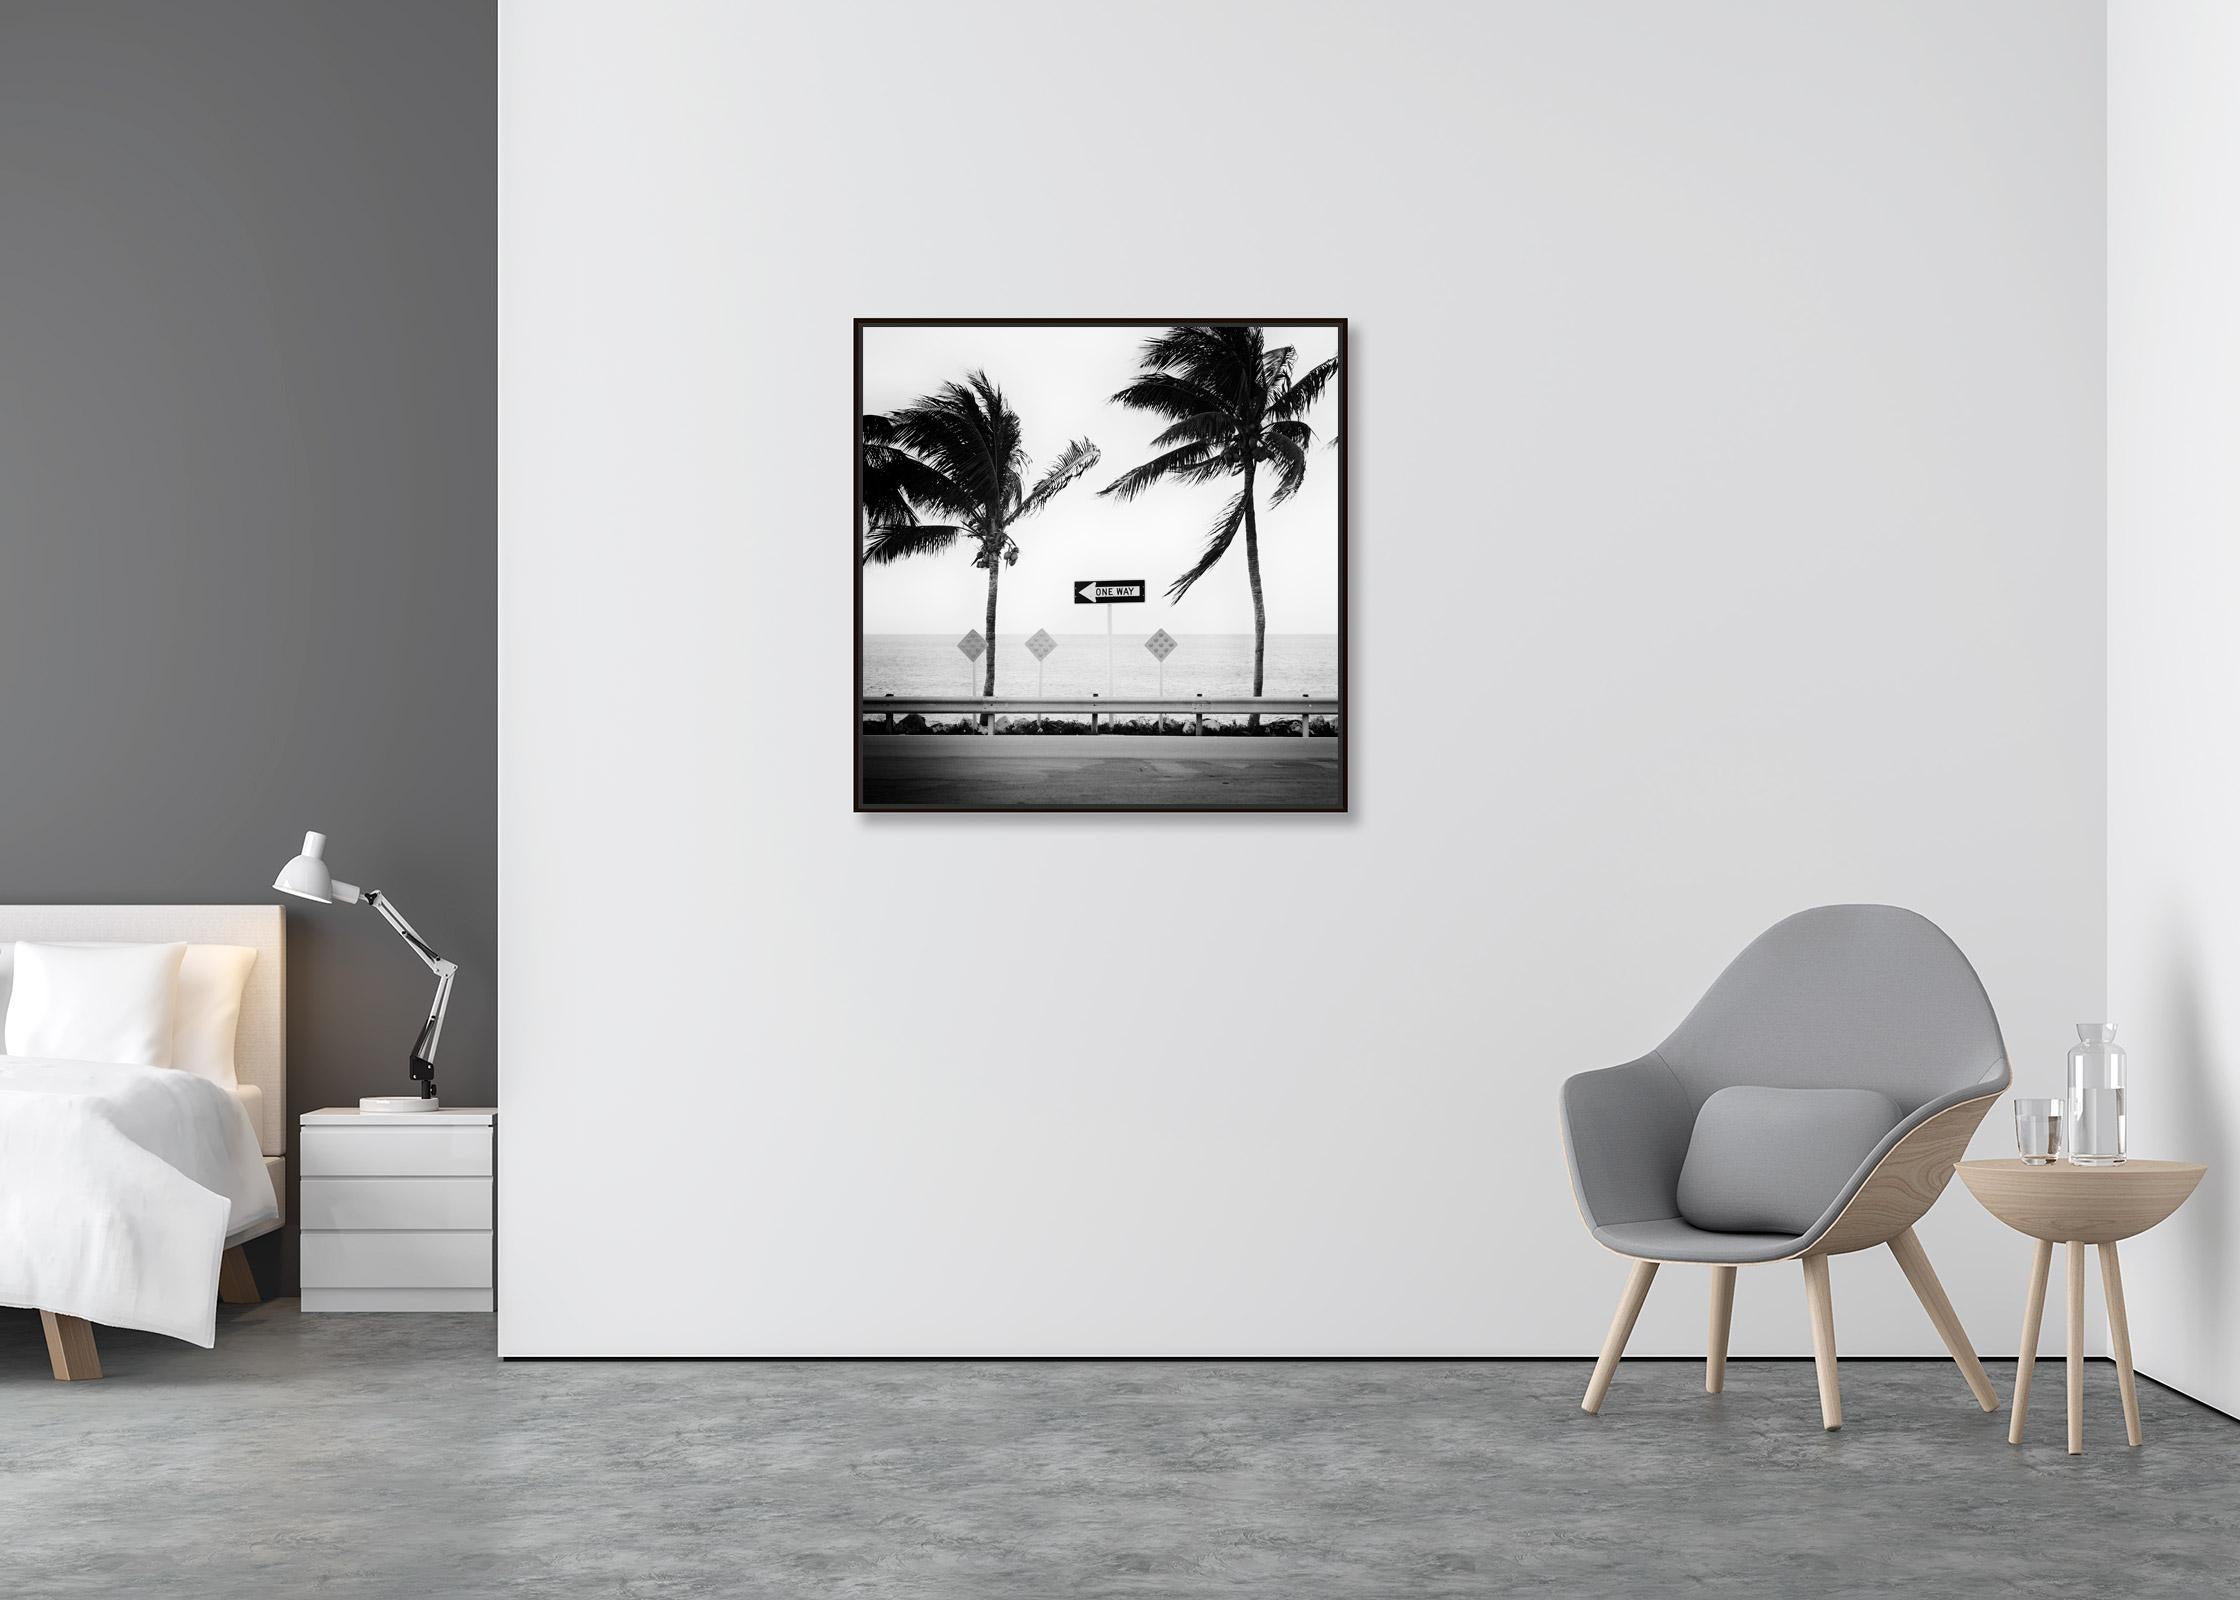 ONE WAY, Miami Beach, Florida, USA, black & white landscape photography print - Contemporary Photograph by Gerald Berghammer